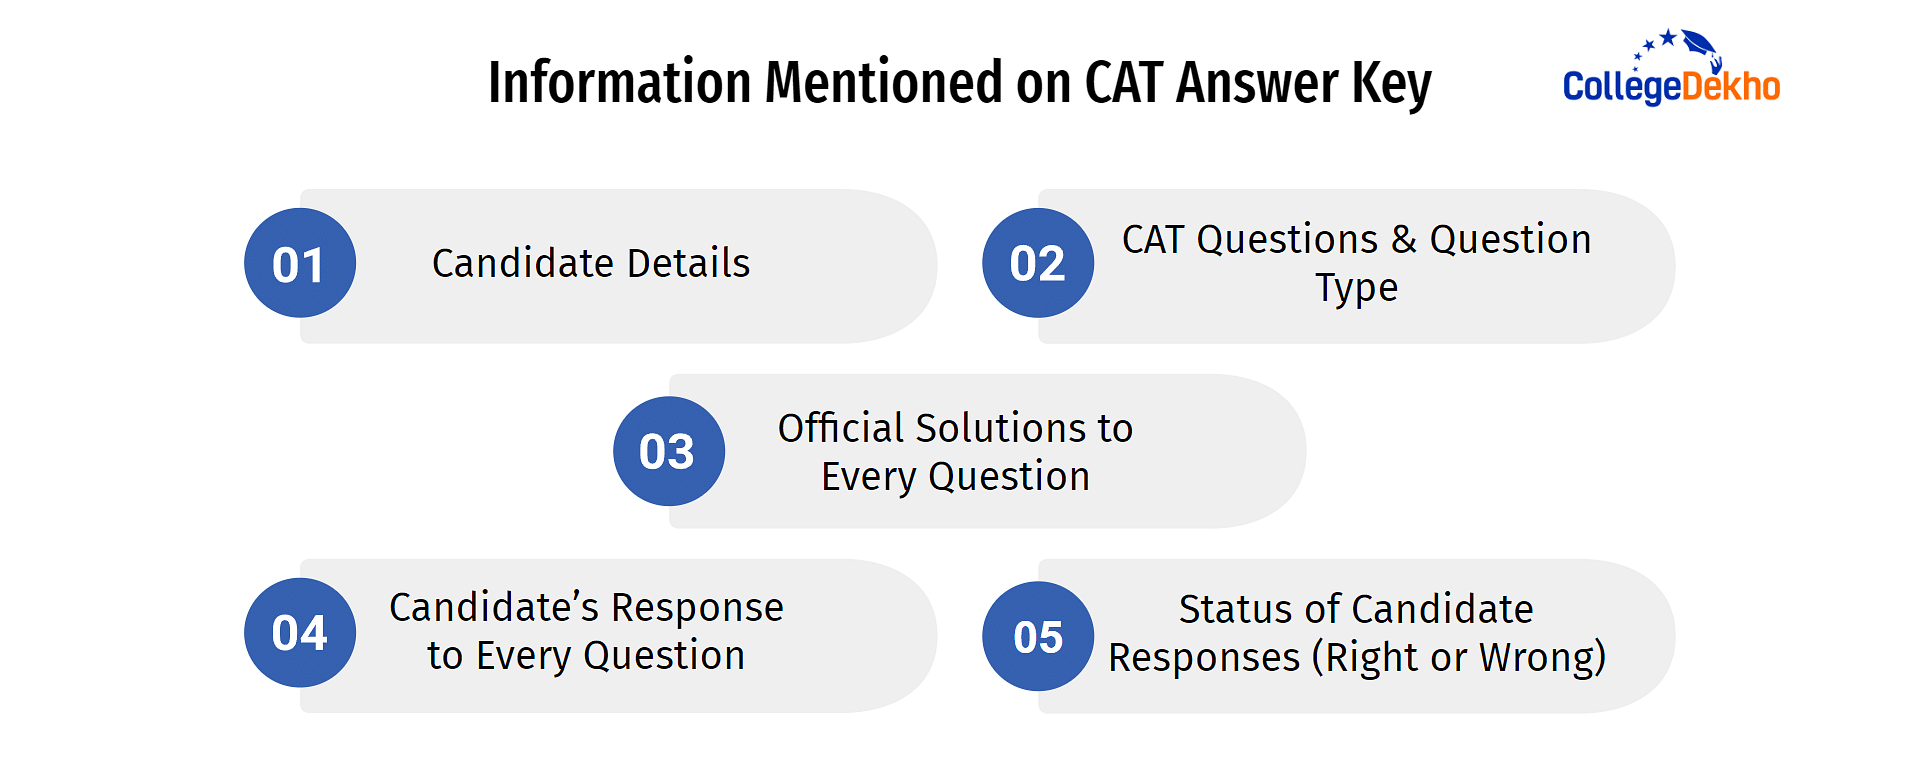 Information Mentioned on CAT Answer Key